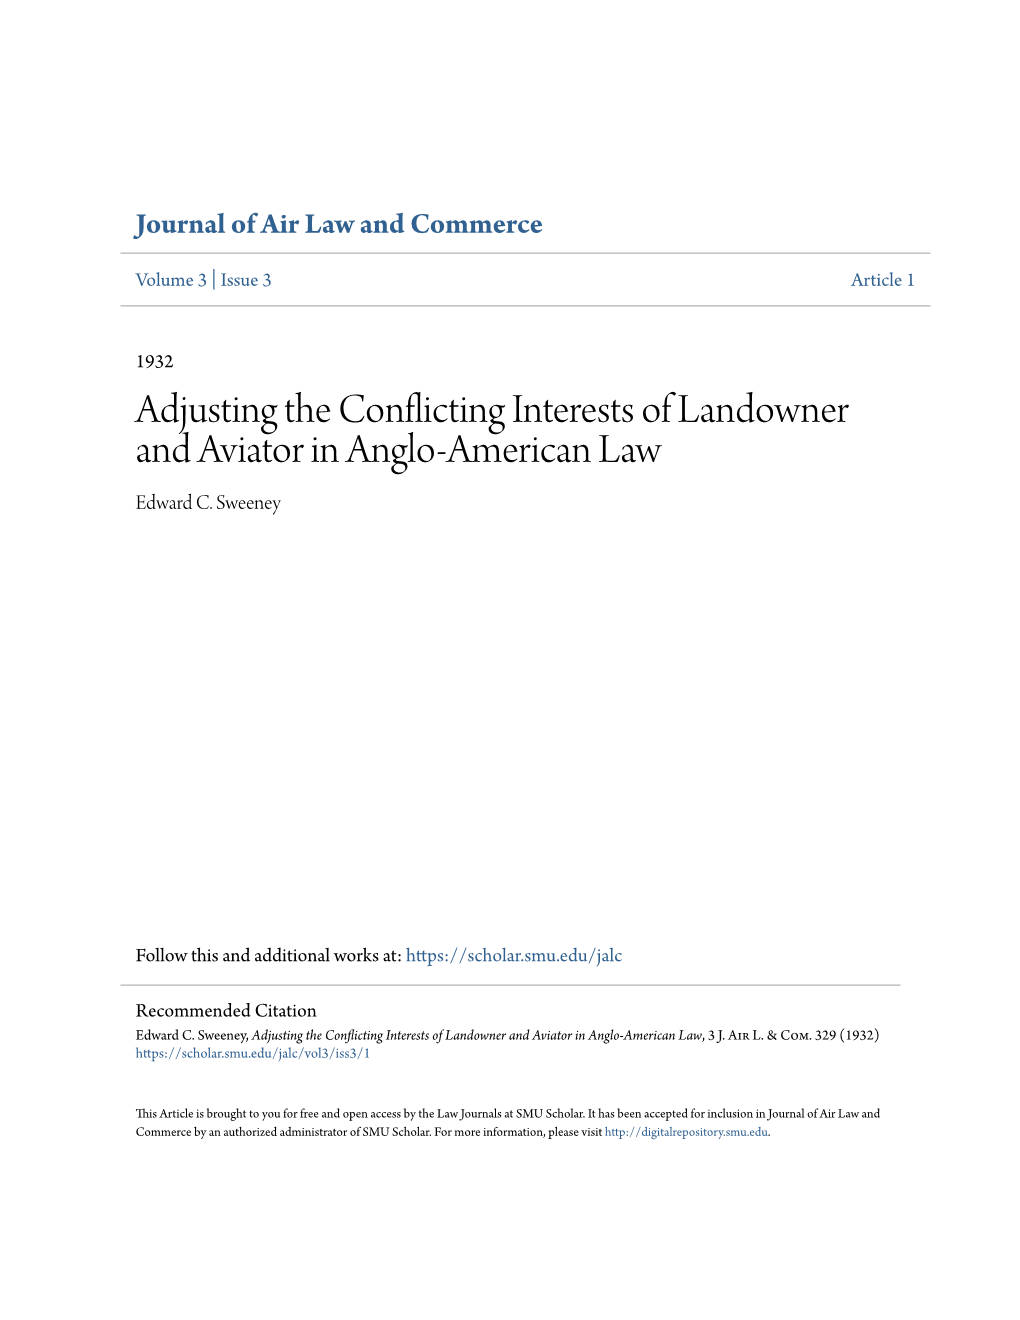 Adjusting the Conflicting Interests of Landowner and Aviator in Anglo-American Law Edward C